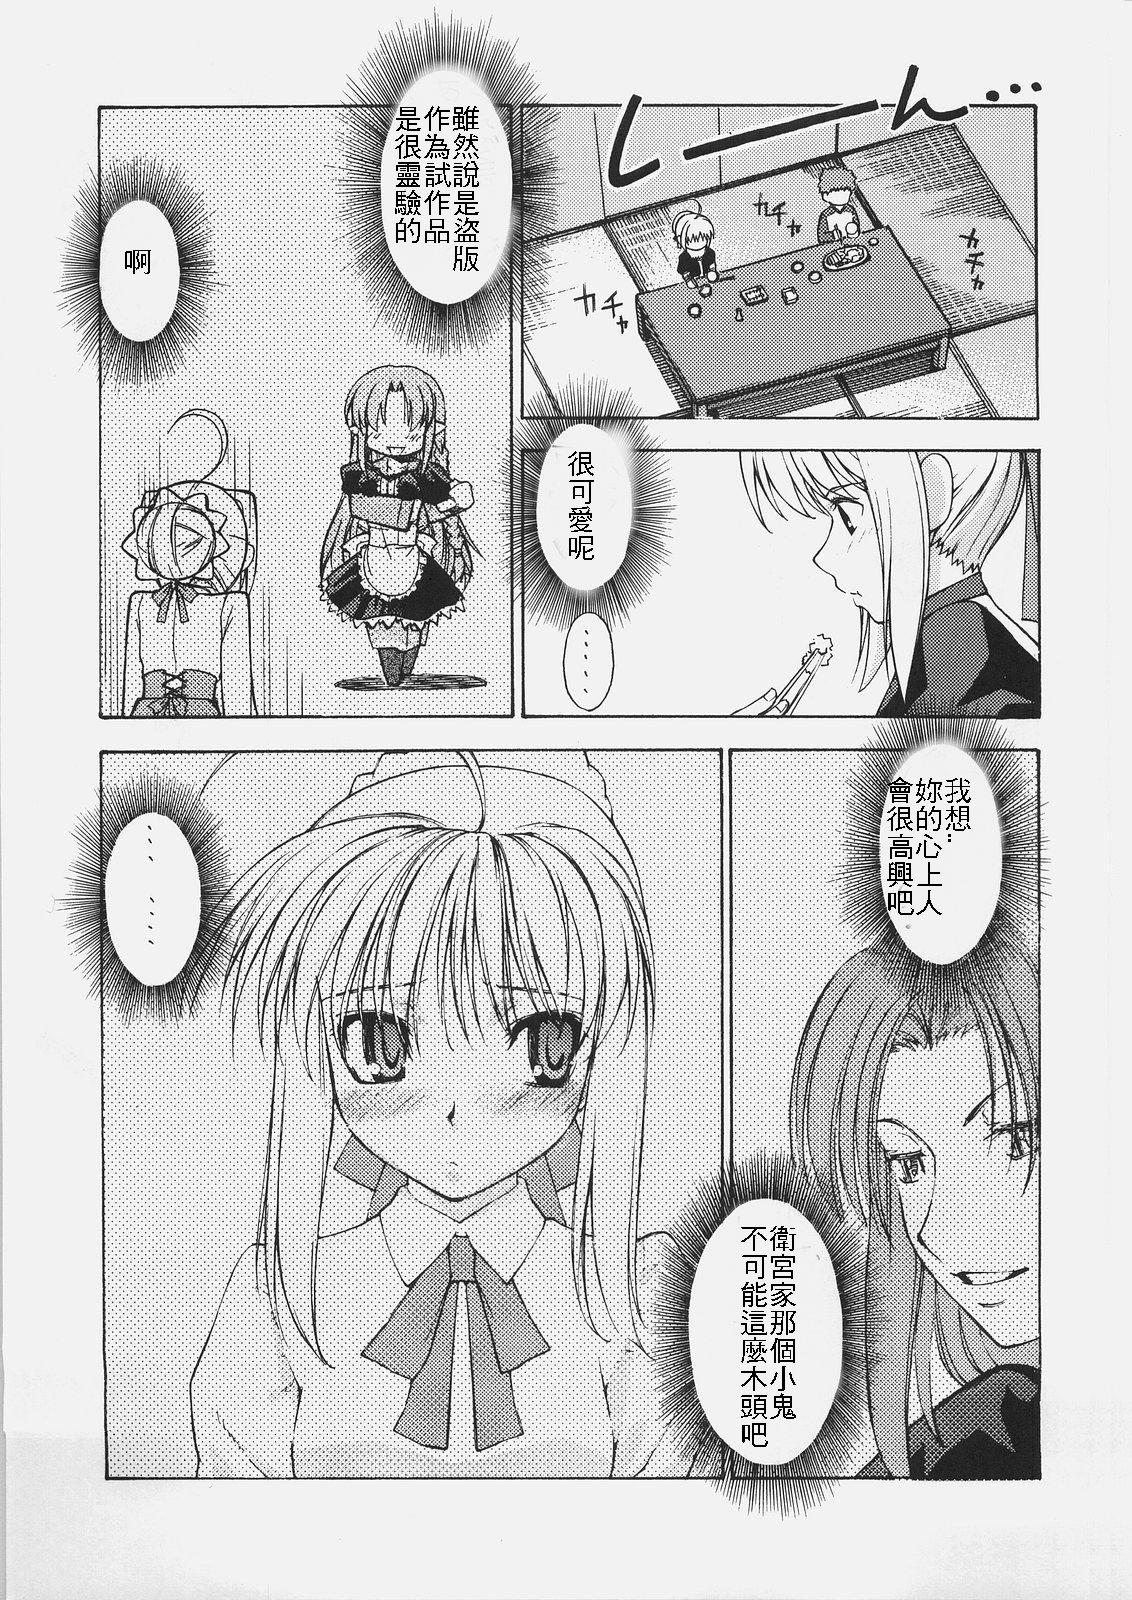 Straight Porn HUNGRY LOVER - Fate stay night Panty - Page 9